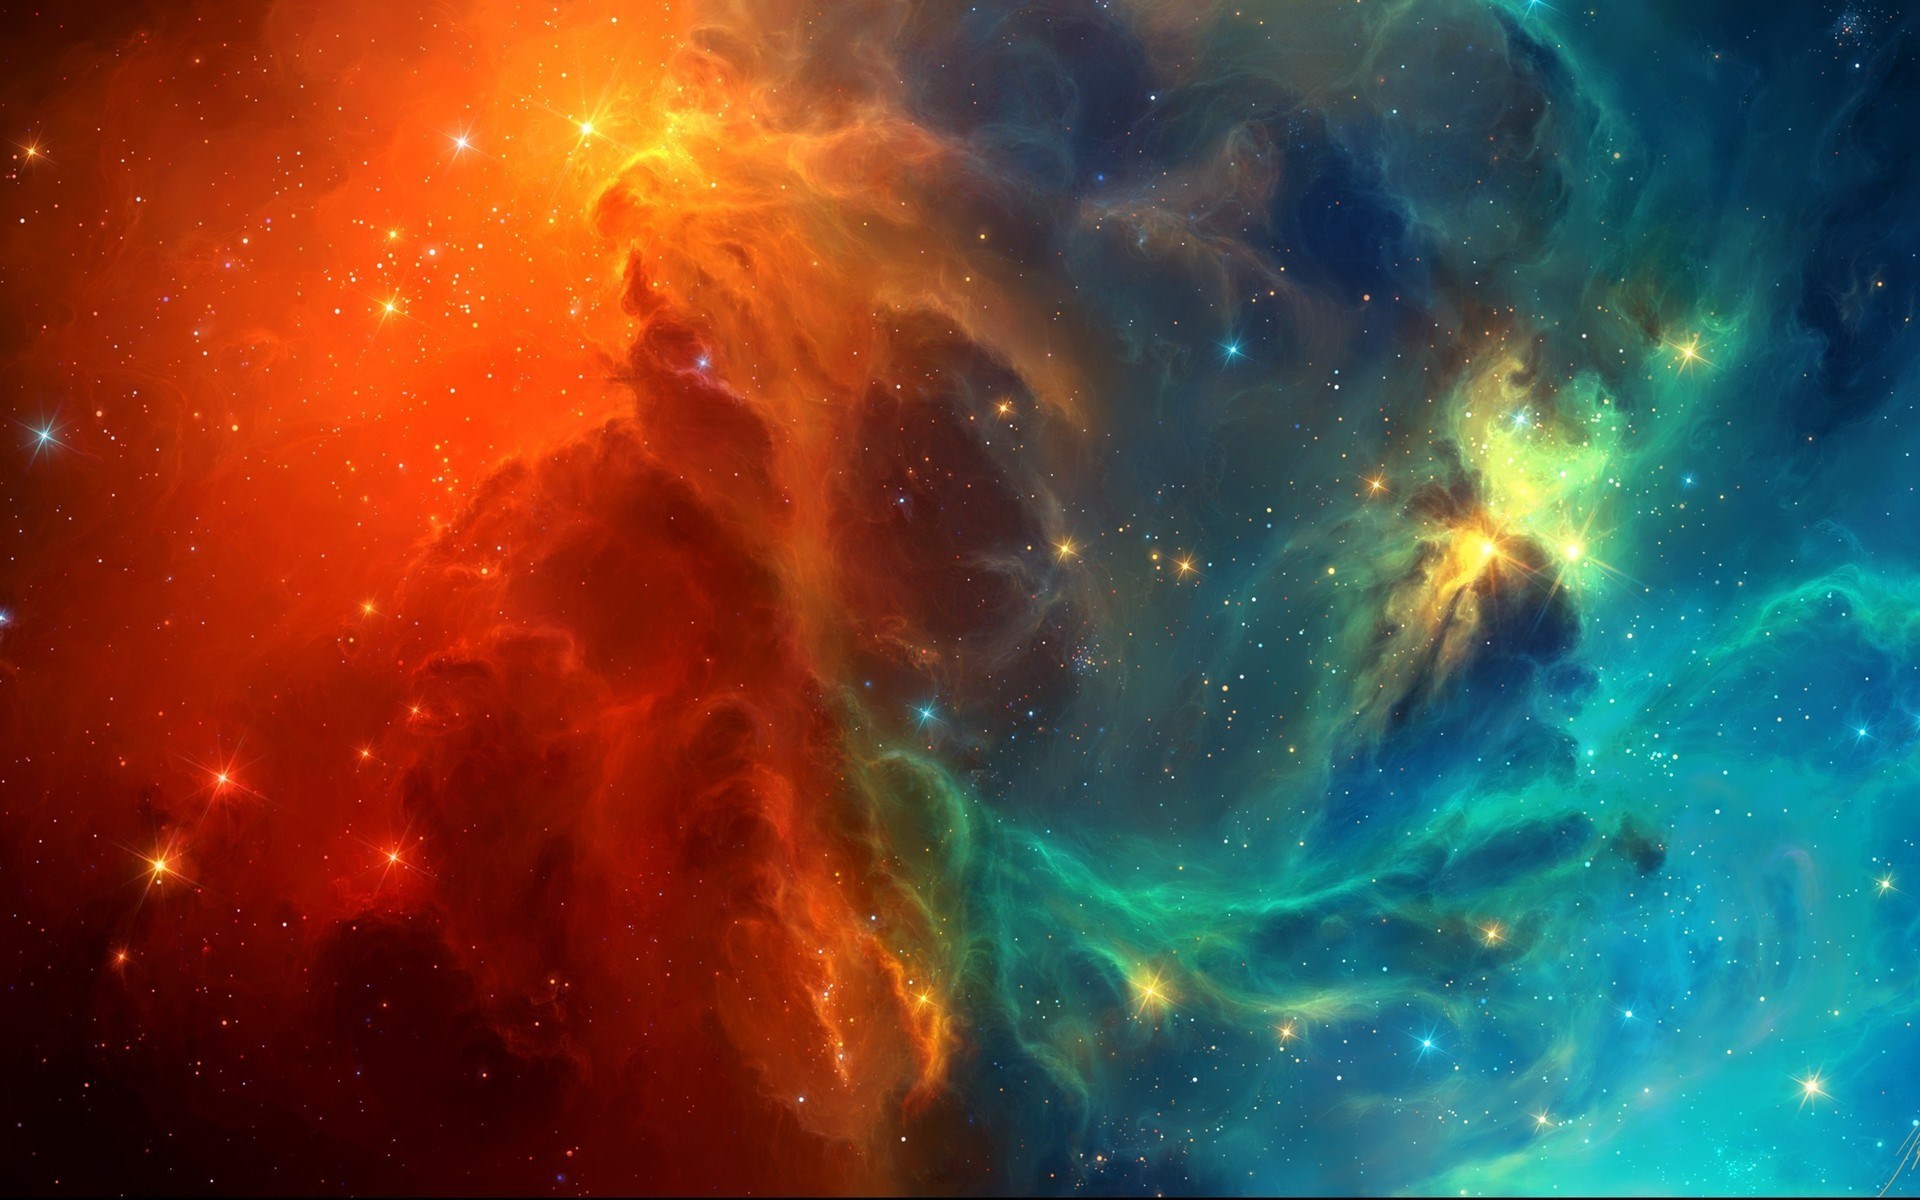 Real Nebula HD Wallpaper Image Amp Pictures Becuo